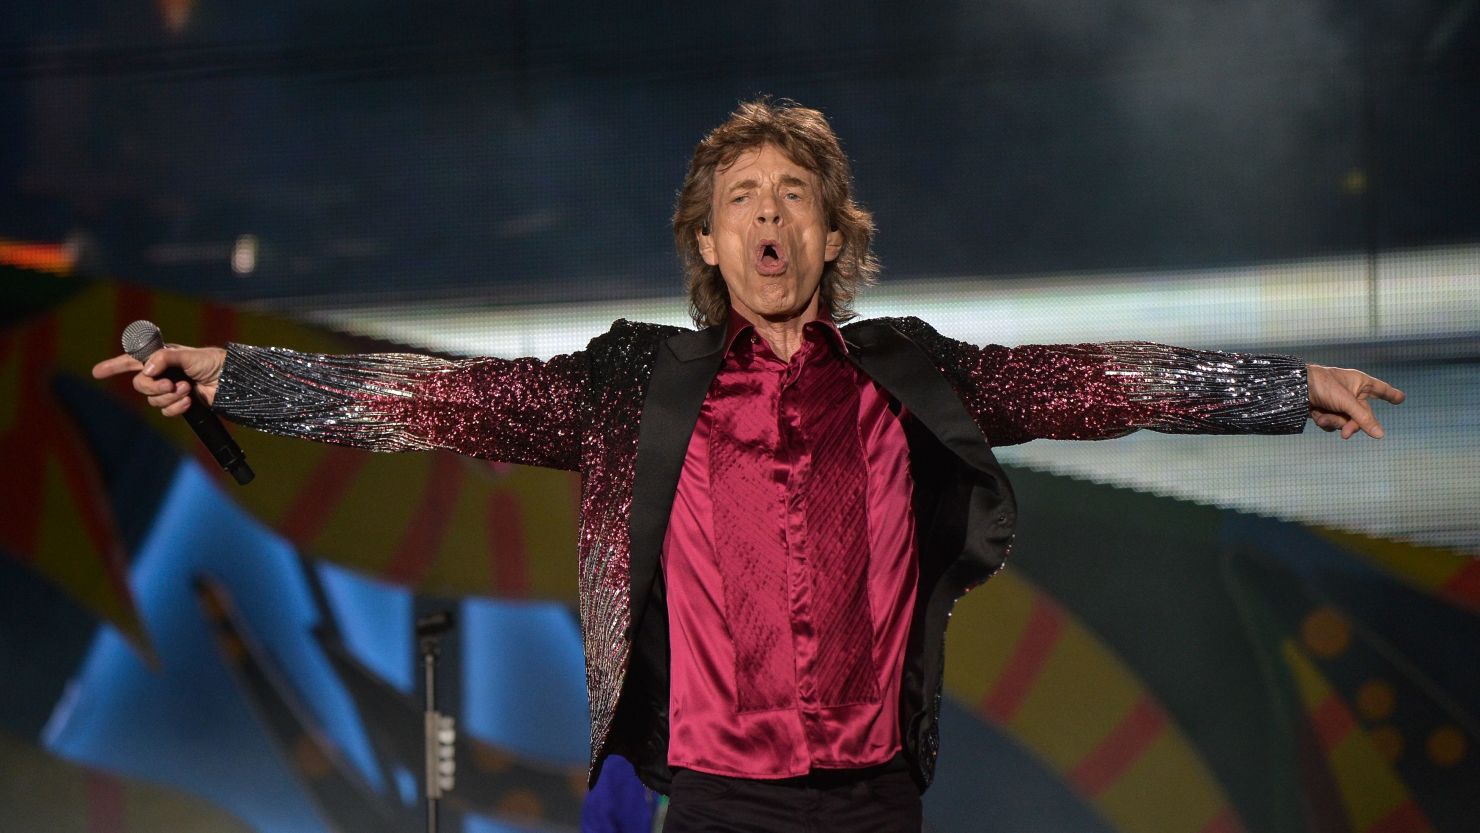 British singer and frontman of rock band The Rolling Stones Mick Jagger performs during a concert at Ciudad Deportiva in Havana, Cuba, on March 25, 2016. 